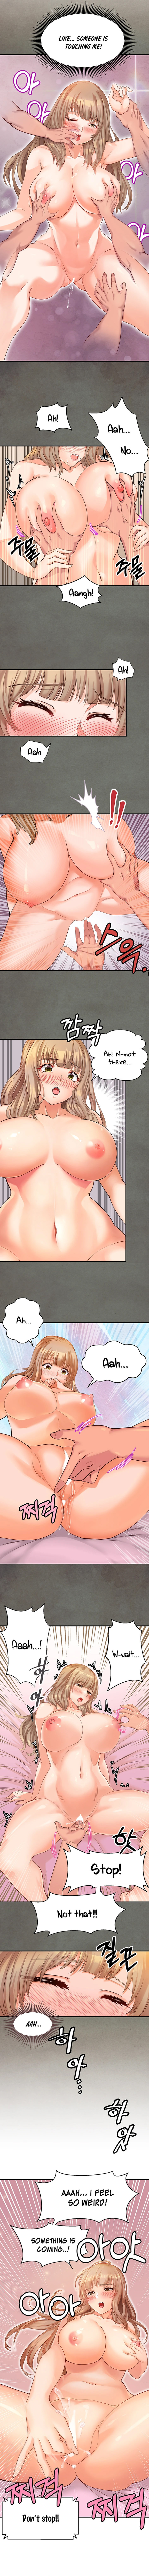 Phone Sex - Chapter 2 Page 7